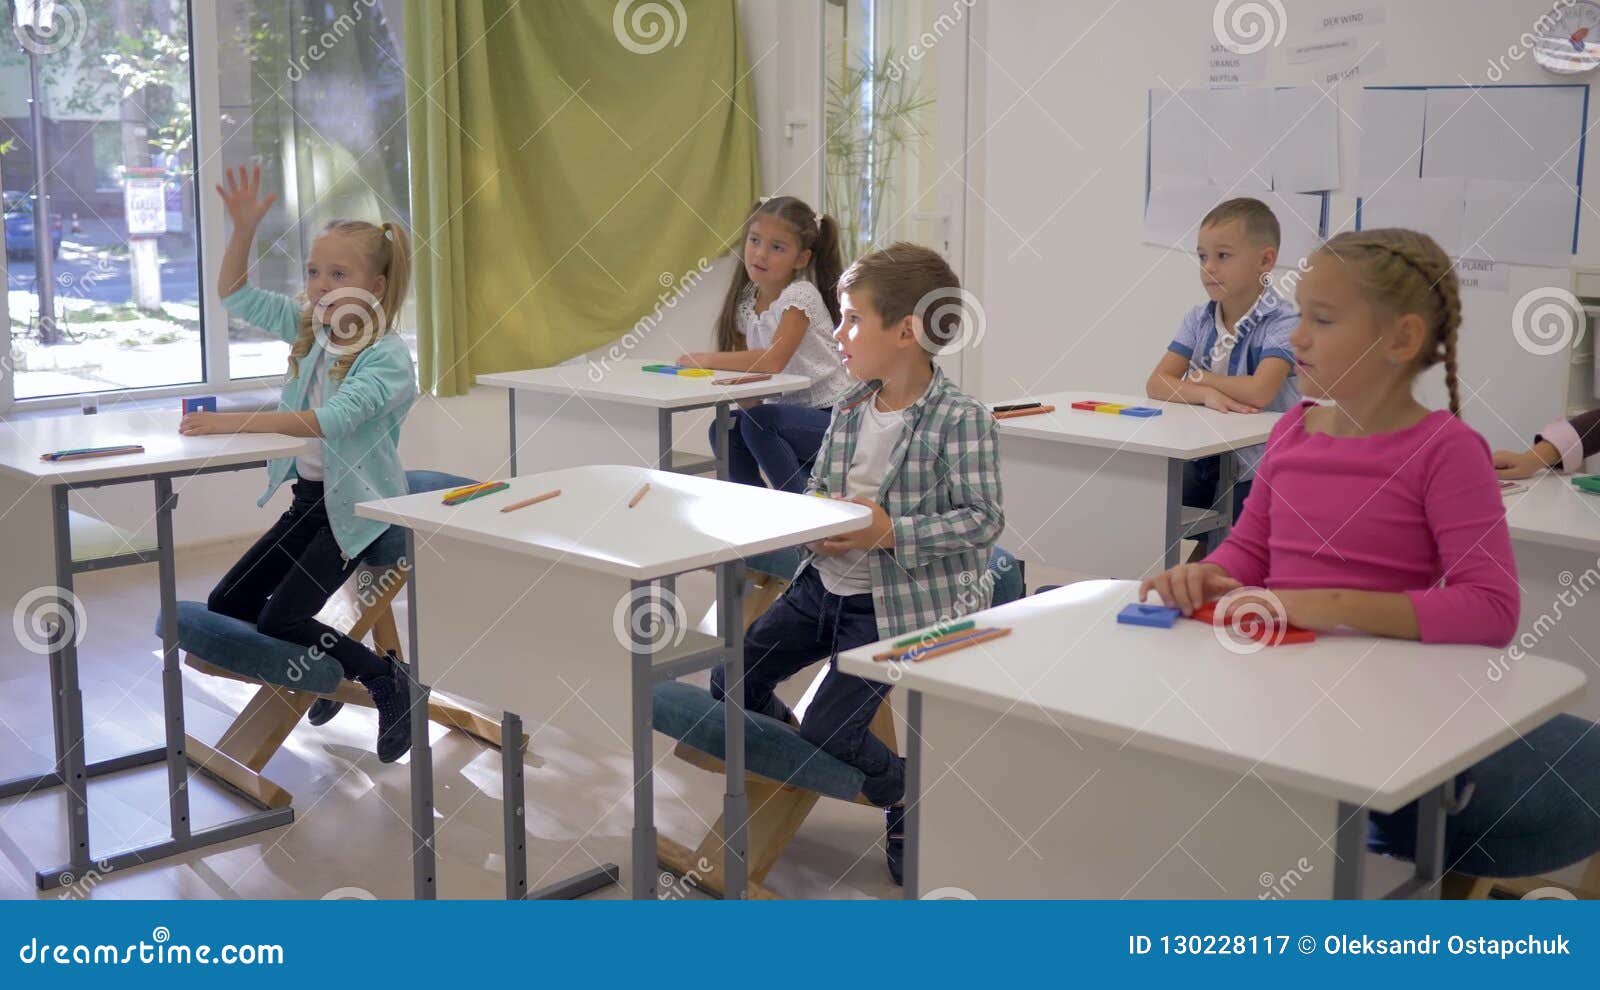 Children At School Boys And Girls Sit At Desks And Raise Hands